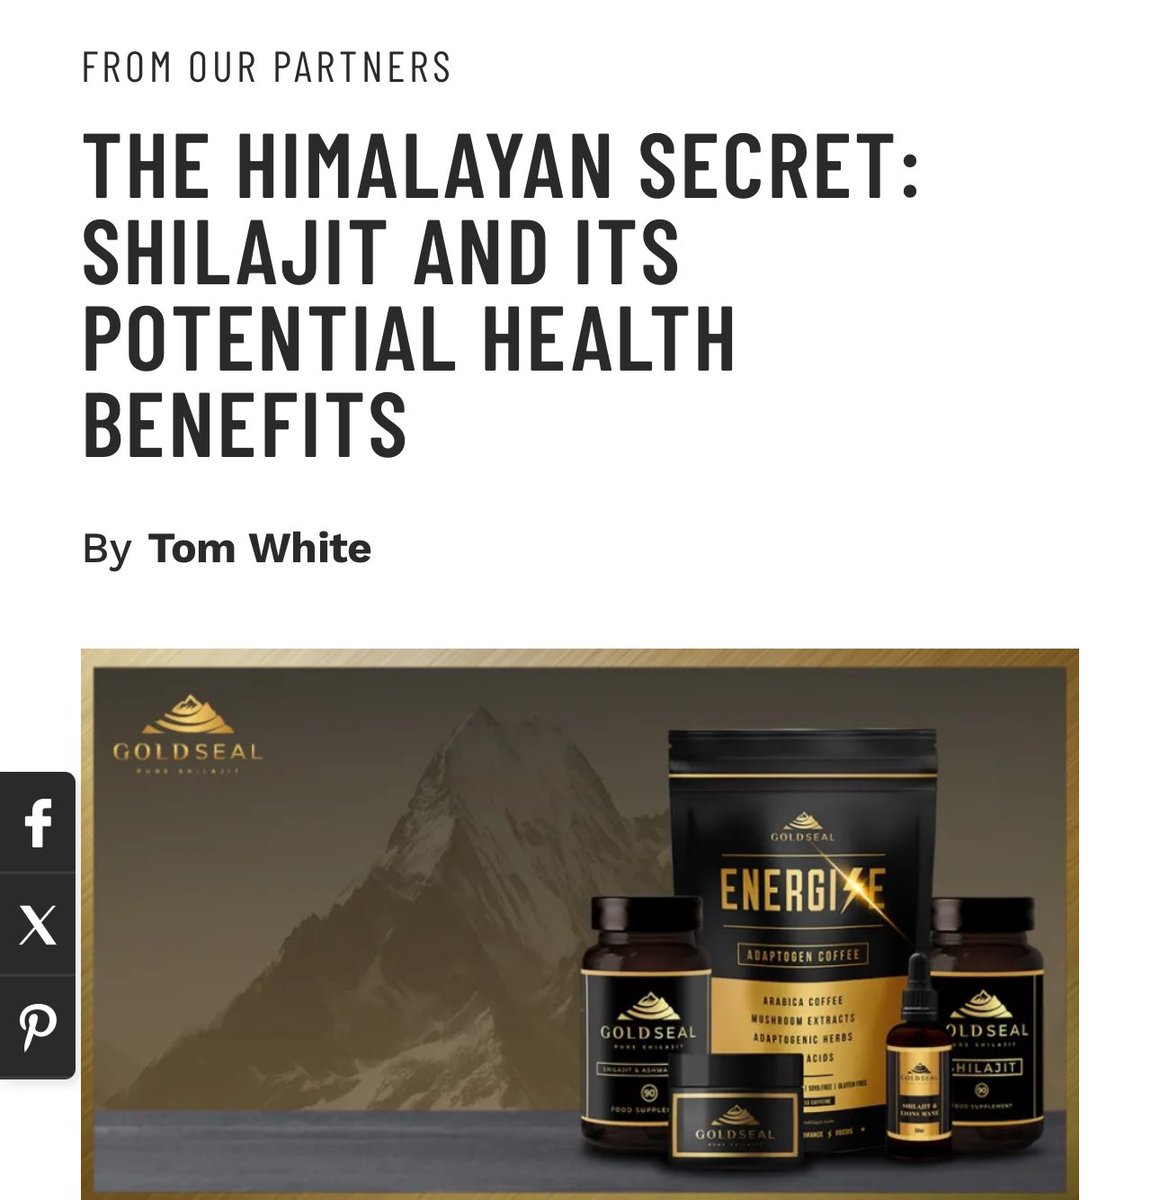 THE HIMALAYAN SECRET: SHILAJIT AND ITS POTENTIAL HEALTH BENEFITS By Tom White Read Article: muscleandfitness.com/features/from-…